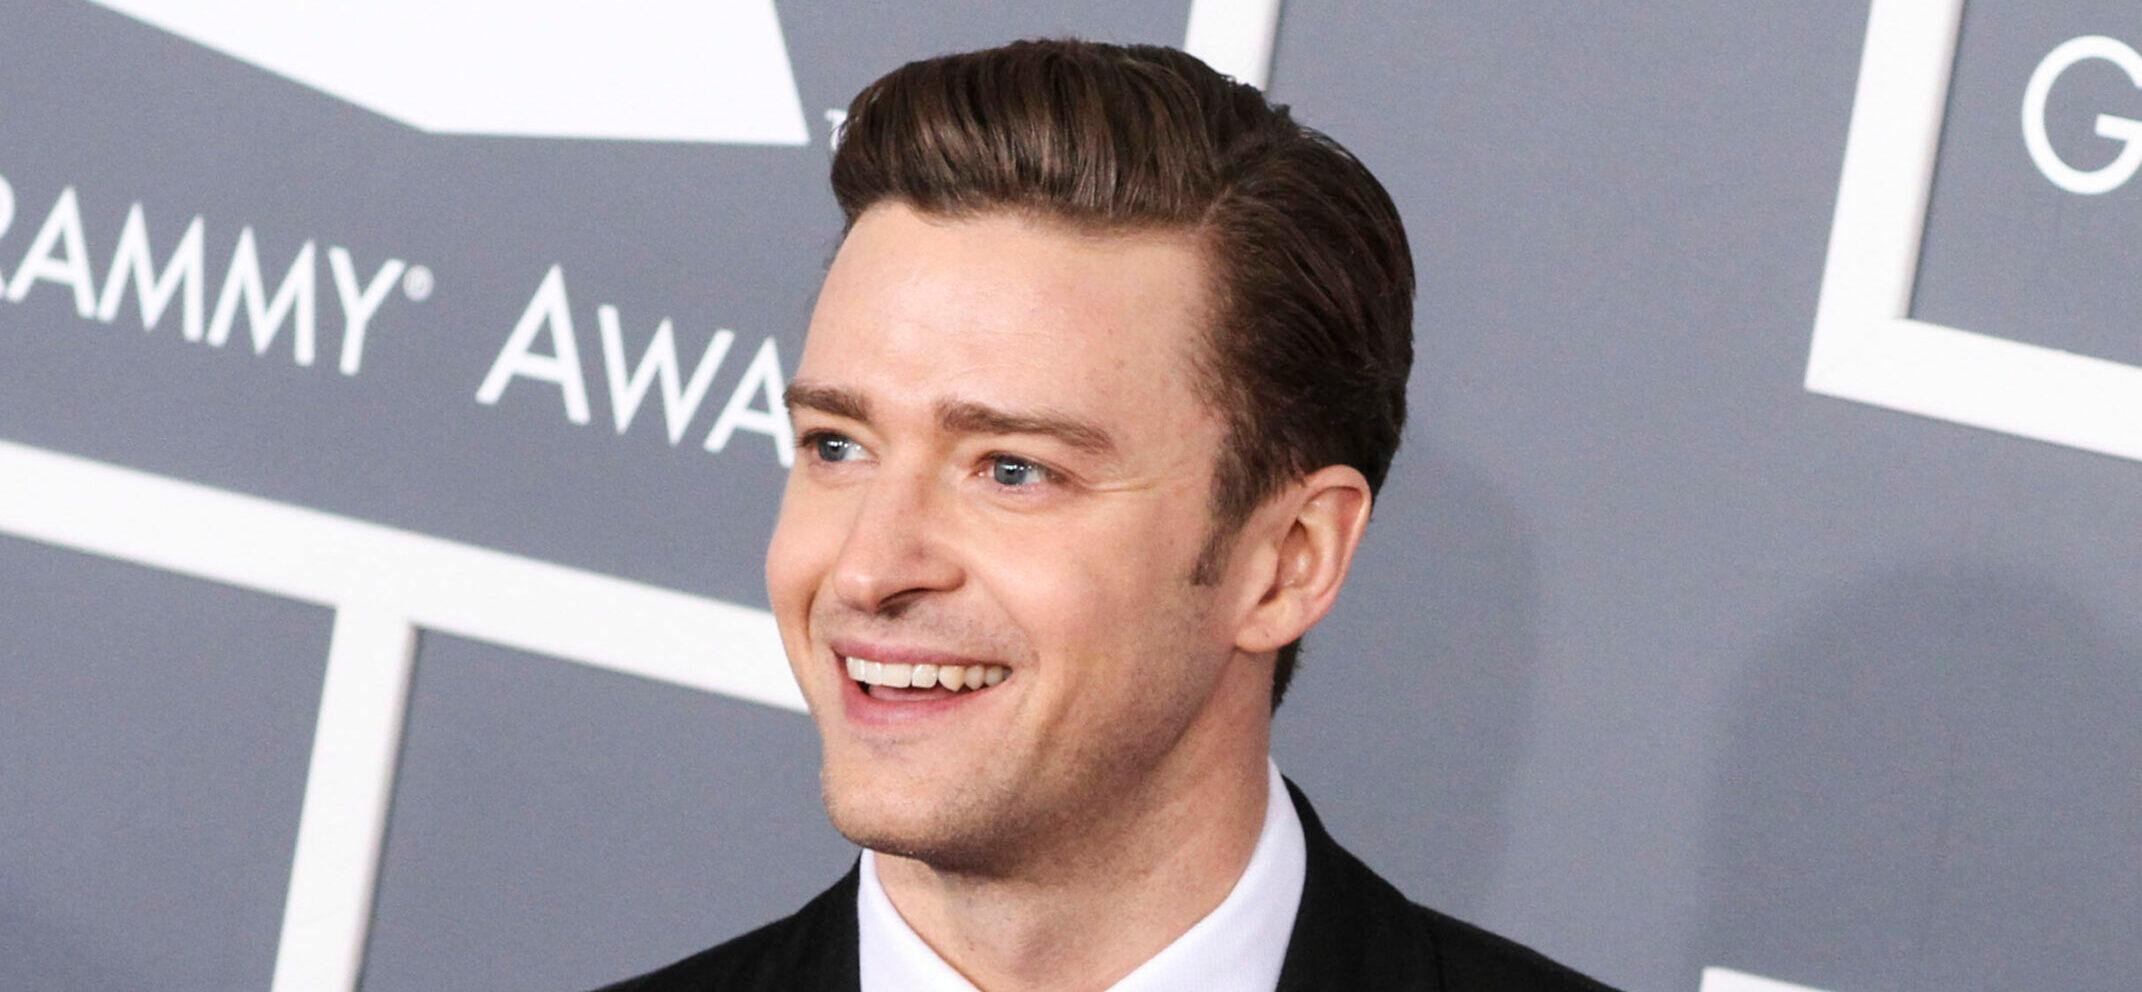 Justin Timberlake at the 55th Annual GRAMMY Awards